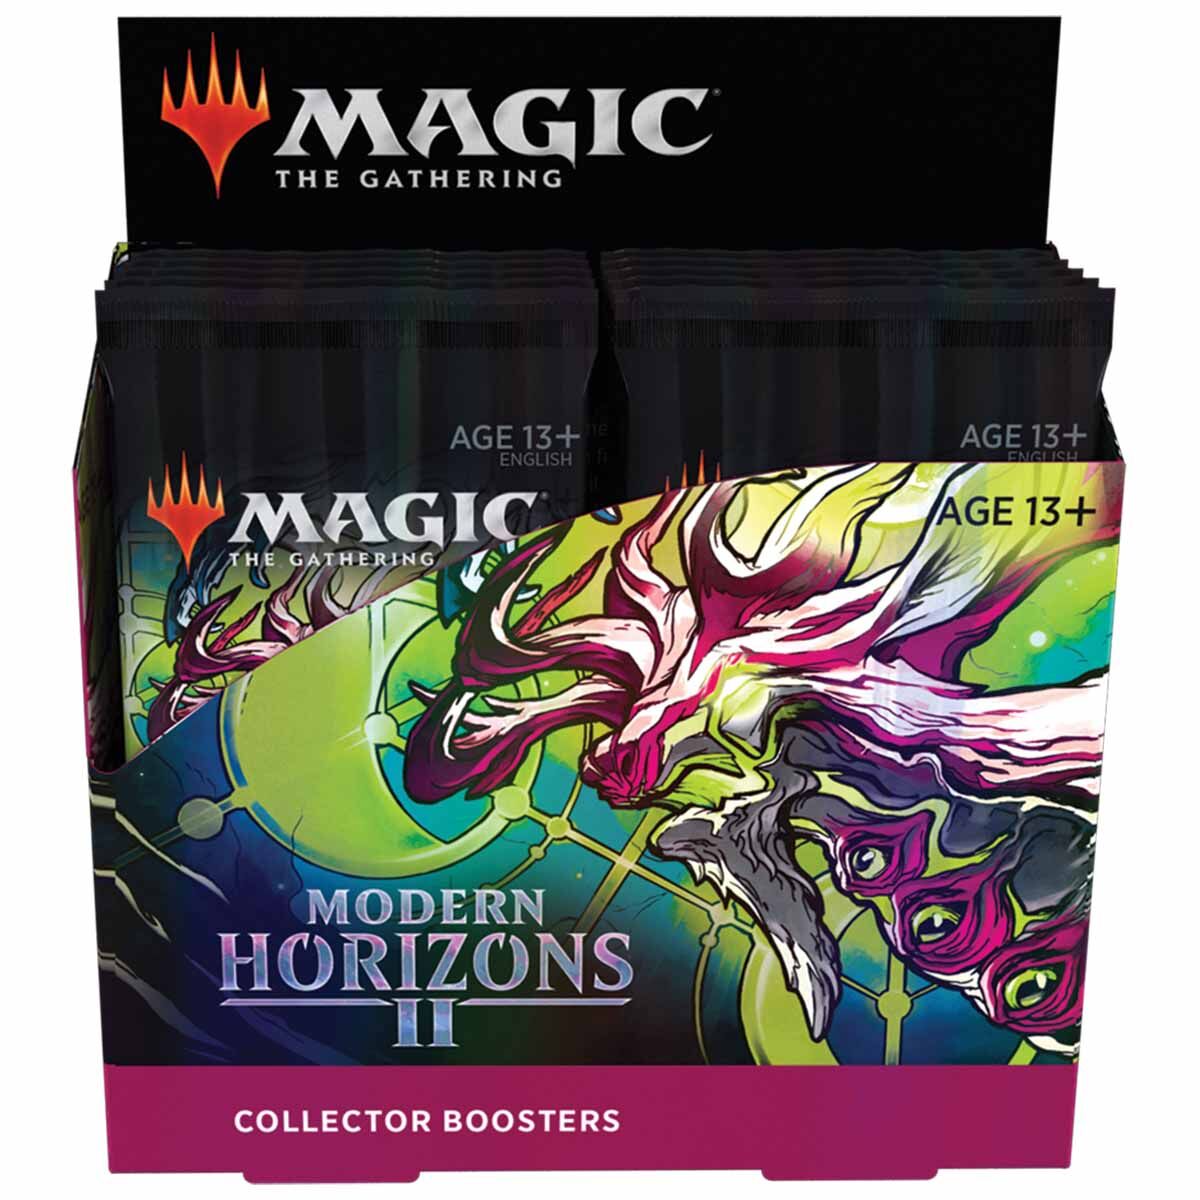 Modern Horizons 2 Collector Booster Box - Magic the Gathering